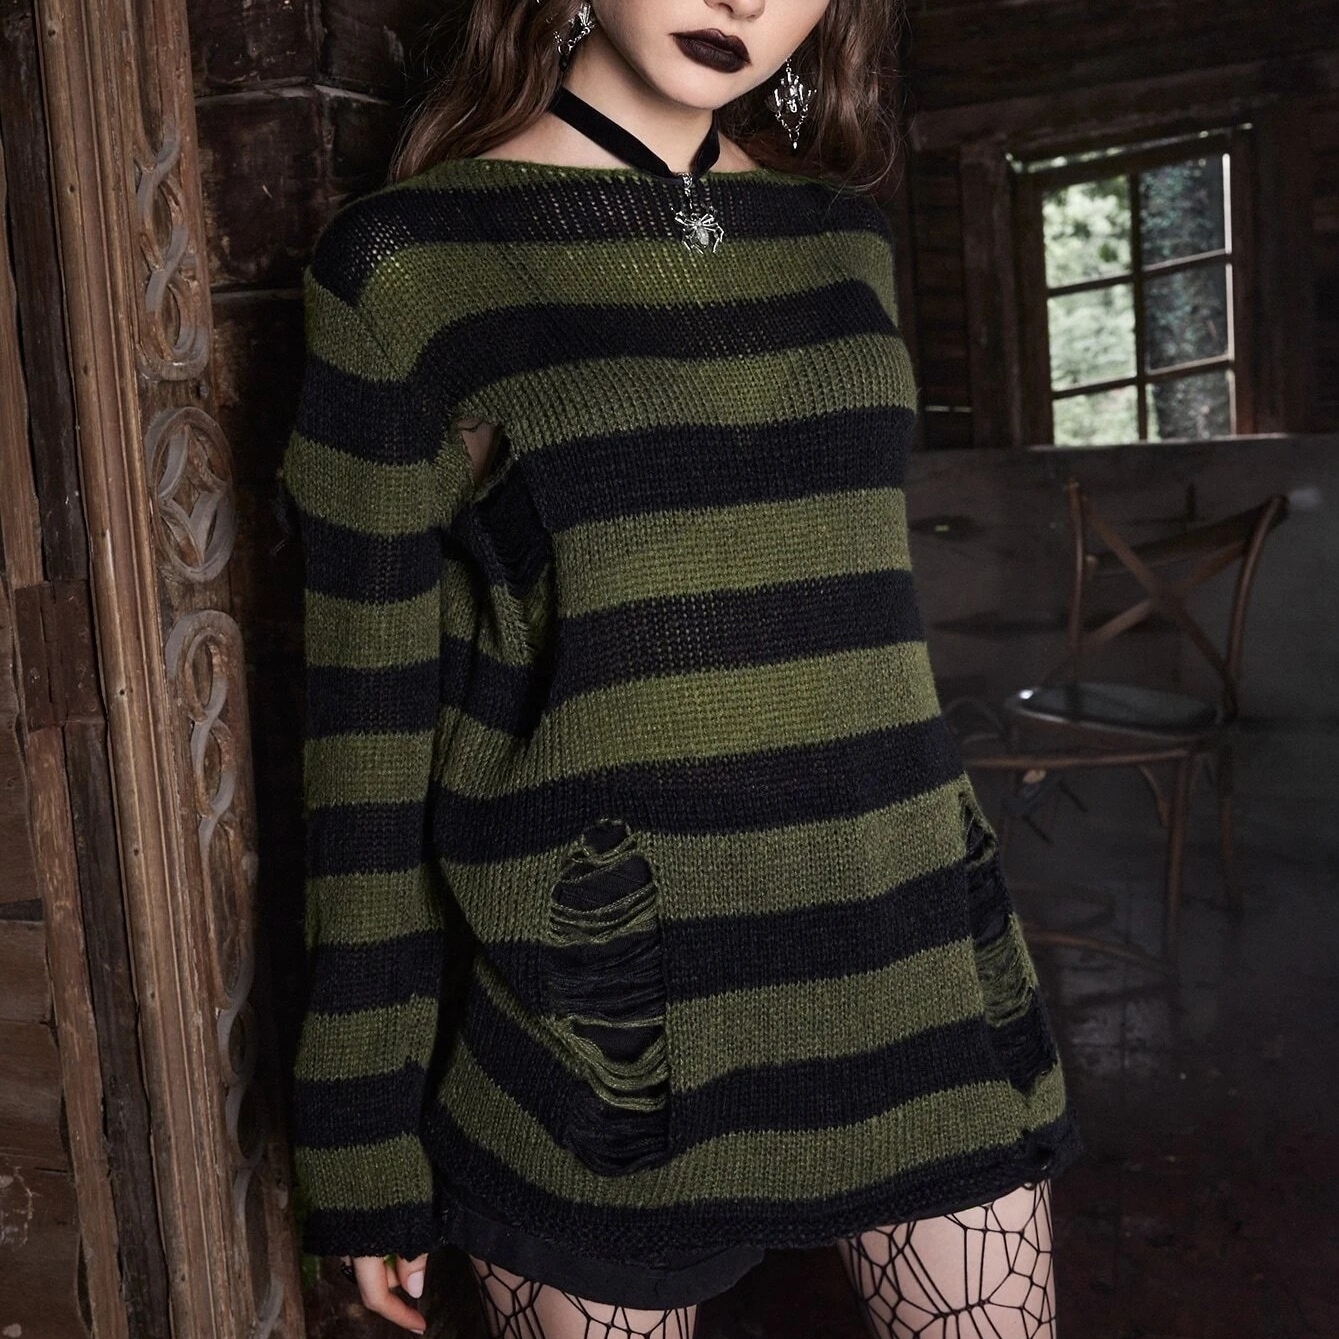 Goth Striped Distressed Sweater - Green, S